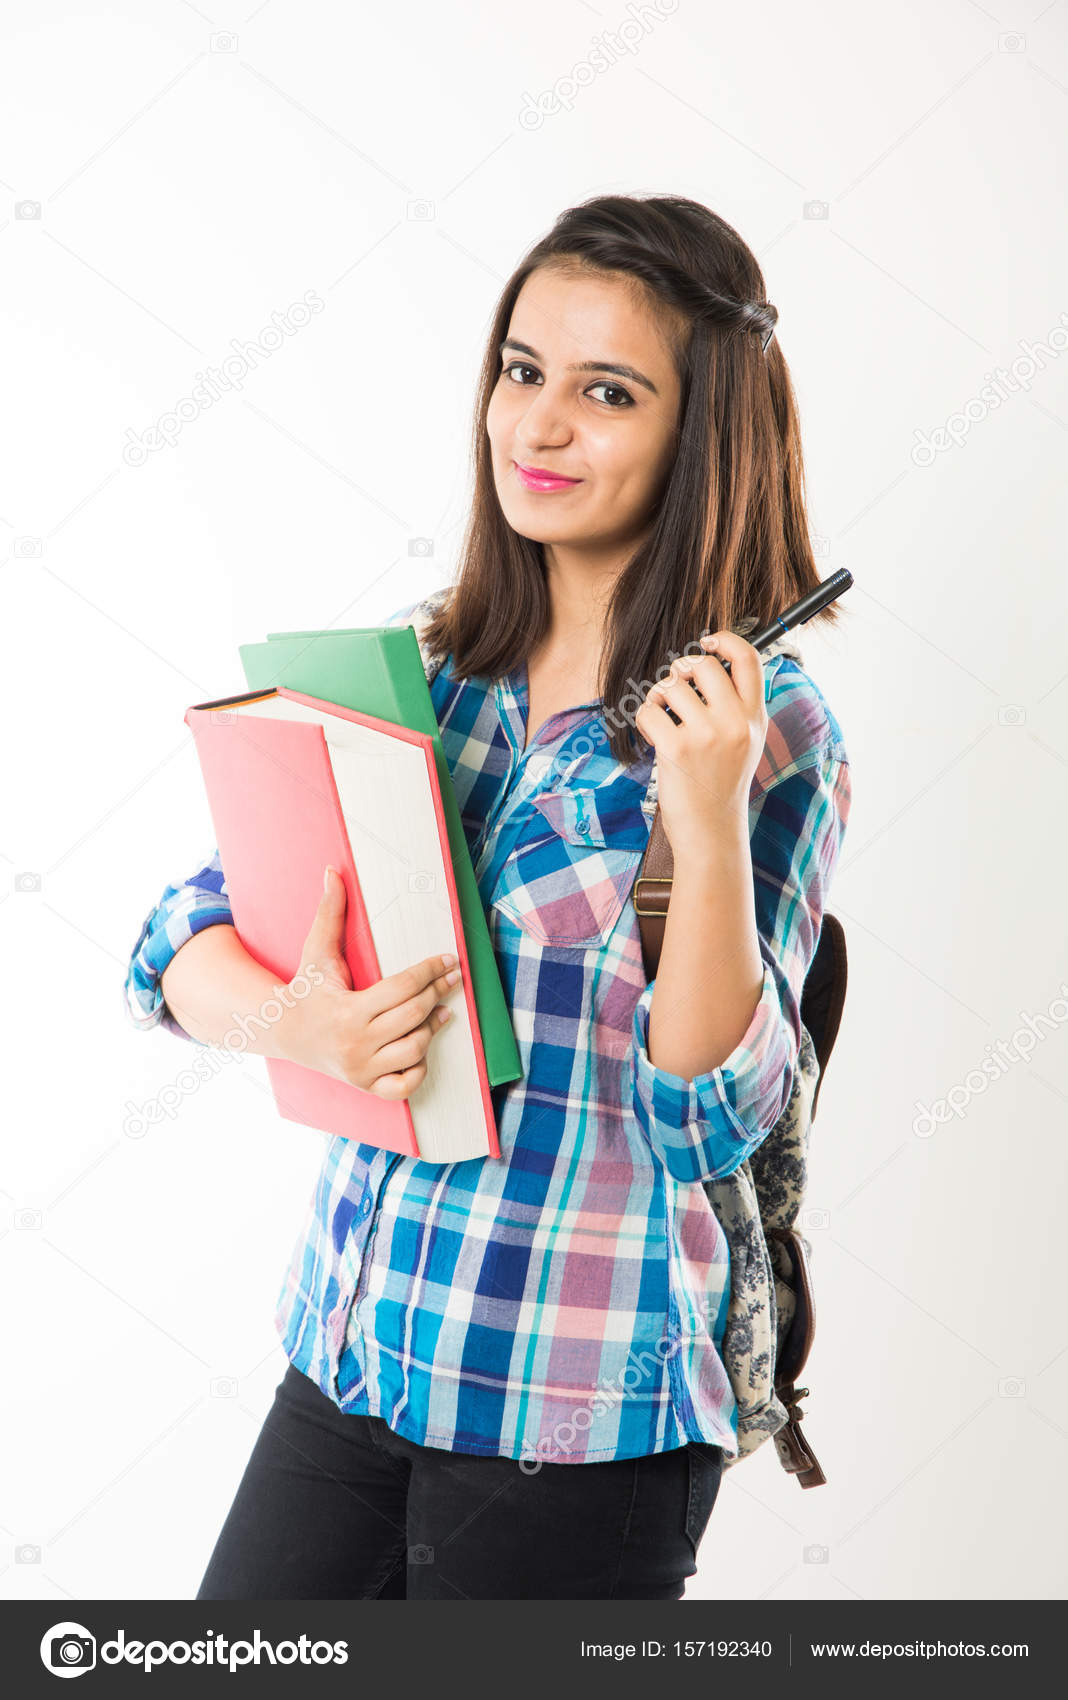 Good Looking Indian Female College Student Standing With Bag Holding